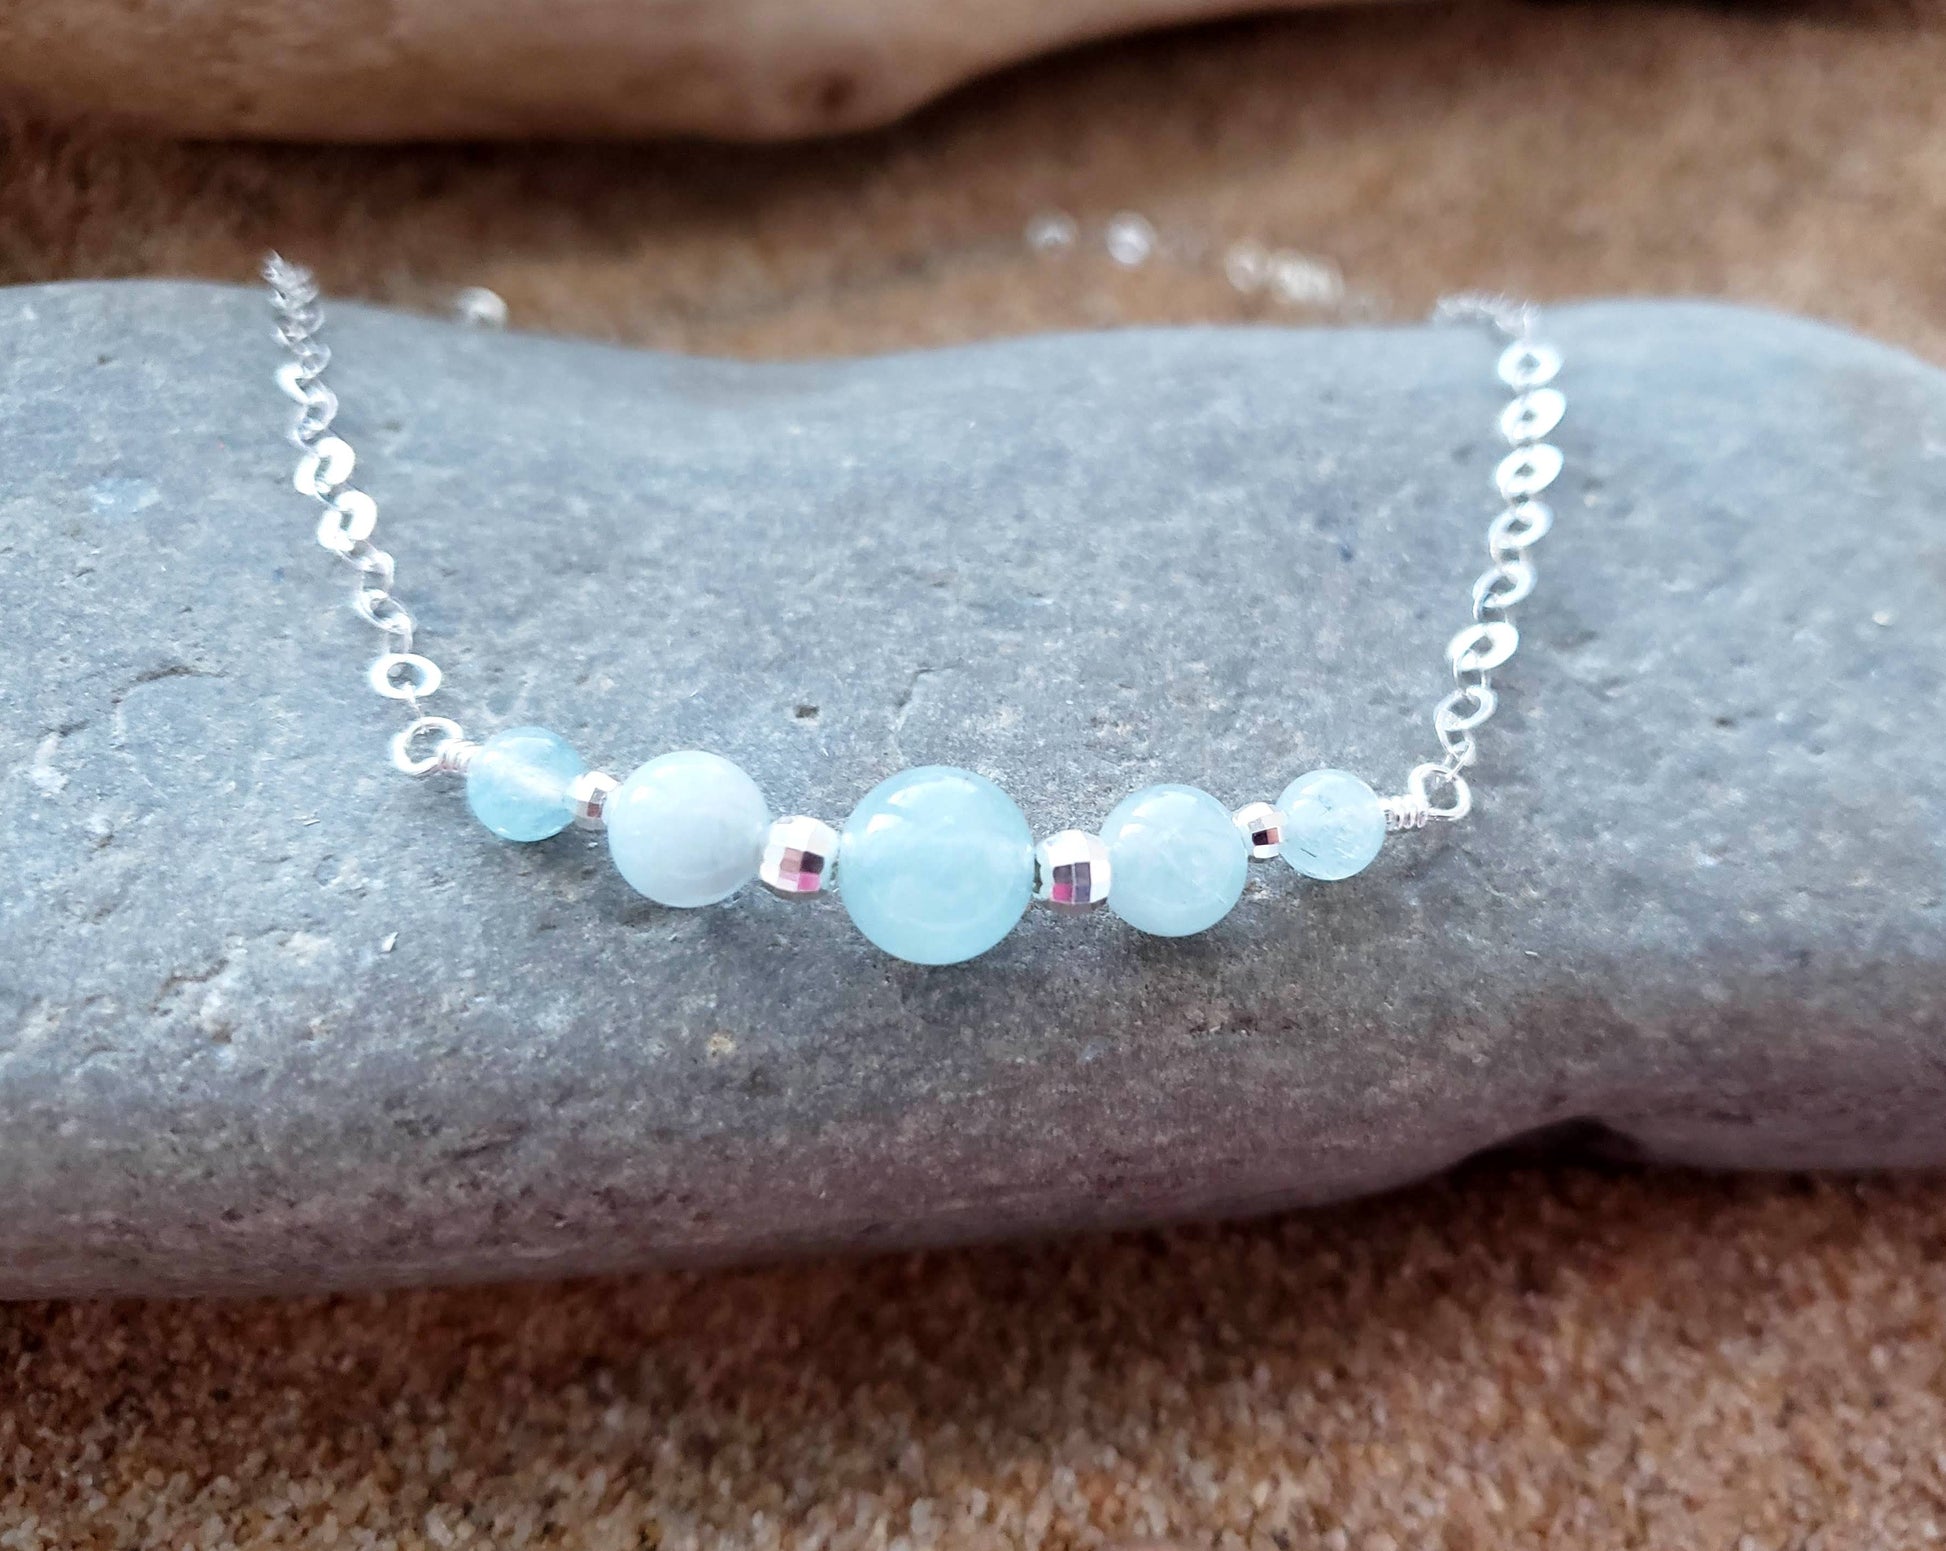 Aquamarine Peaceful Journey Necklace with five Aquamarine stones Sterling Silver beads and sparkly chain.